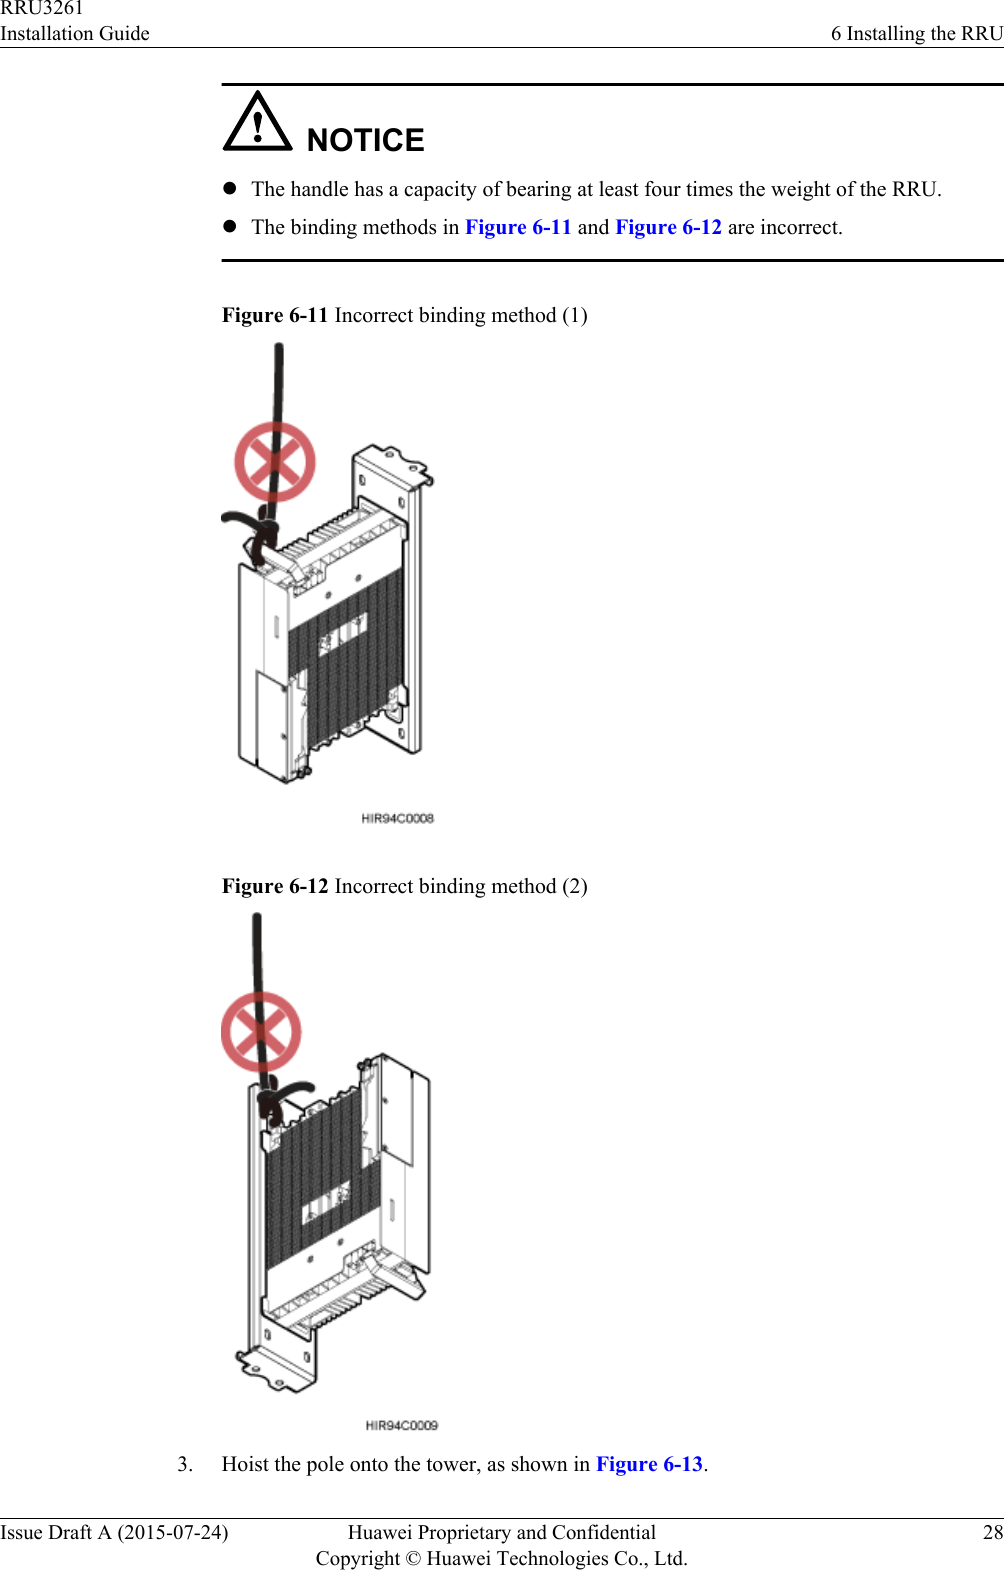 NOTICElThe handle has a capacity of bearing at least four times the weight of the RRU.lThe binding methods in Figure 6-11 and Figure 6-12 are incorrect.Figure 6-11 Incorrect binding method (1)Figure 6-12 Incorrect binding method (2)3. Hoist the pole onto the tower, as shown in Figure 6-13.RRU3261Installation Guide 6 Installing the RRUIssue Draft A (2015-07-24) Huawei Proprietary and ConfidentialCopyright © Huawei Technologies Co., Ltd.28